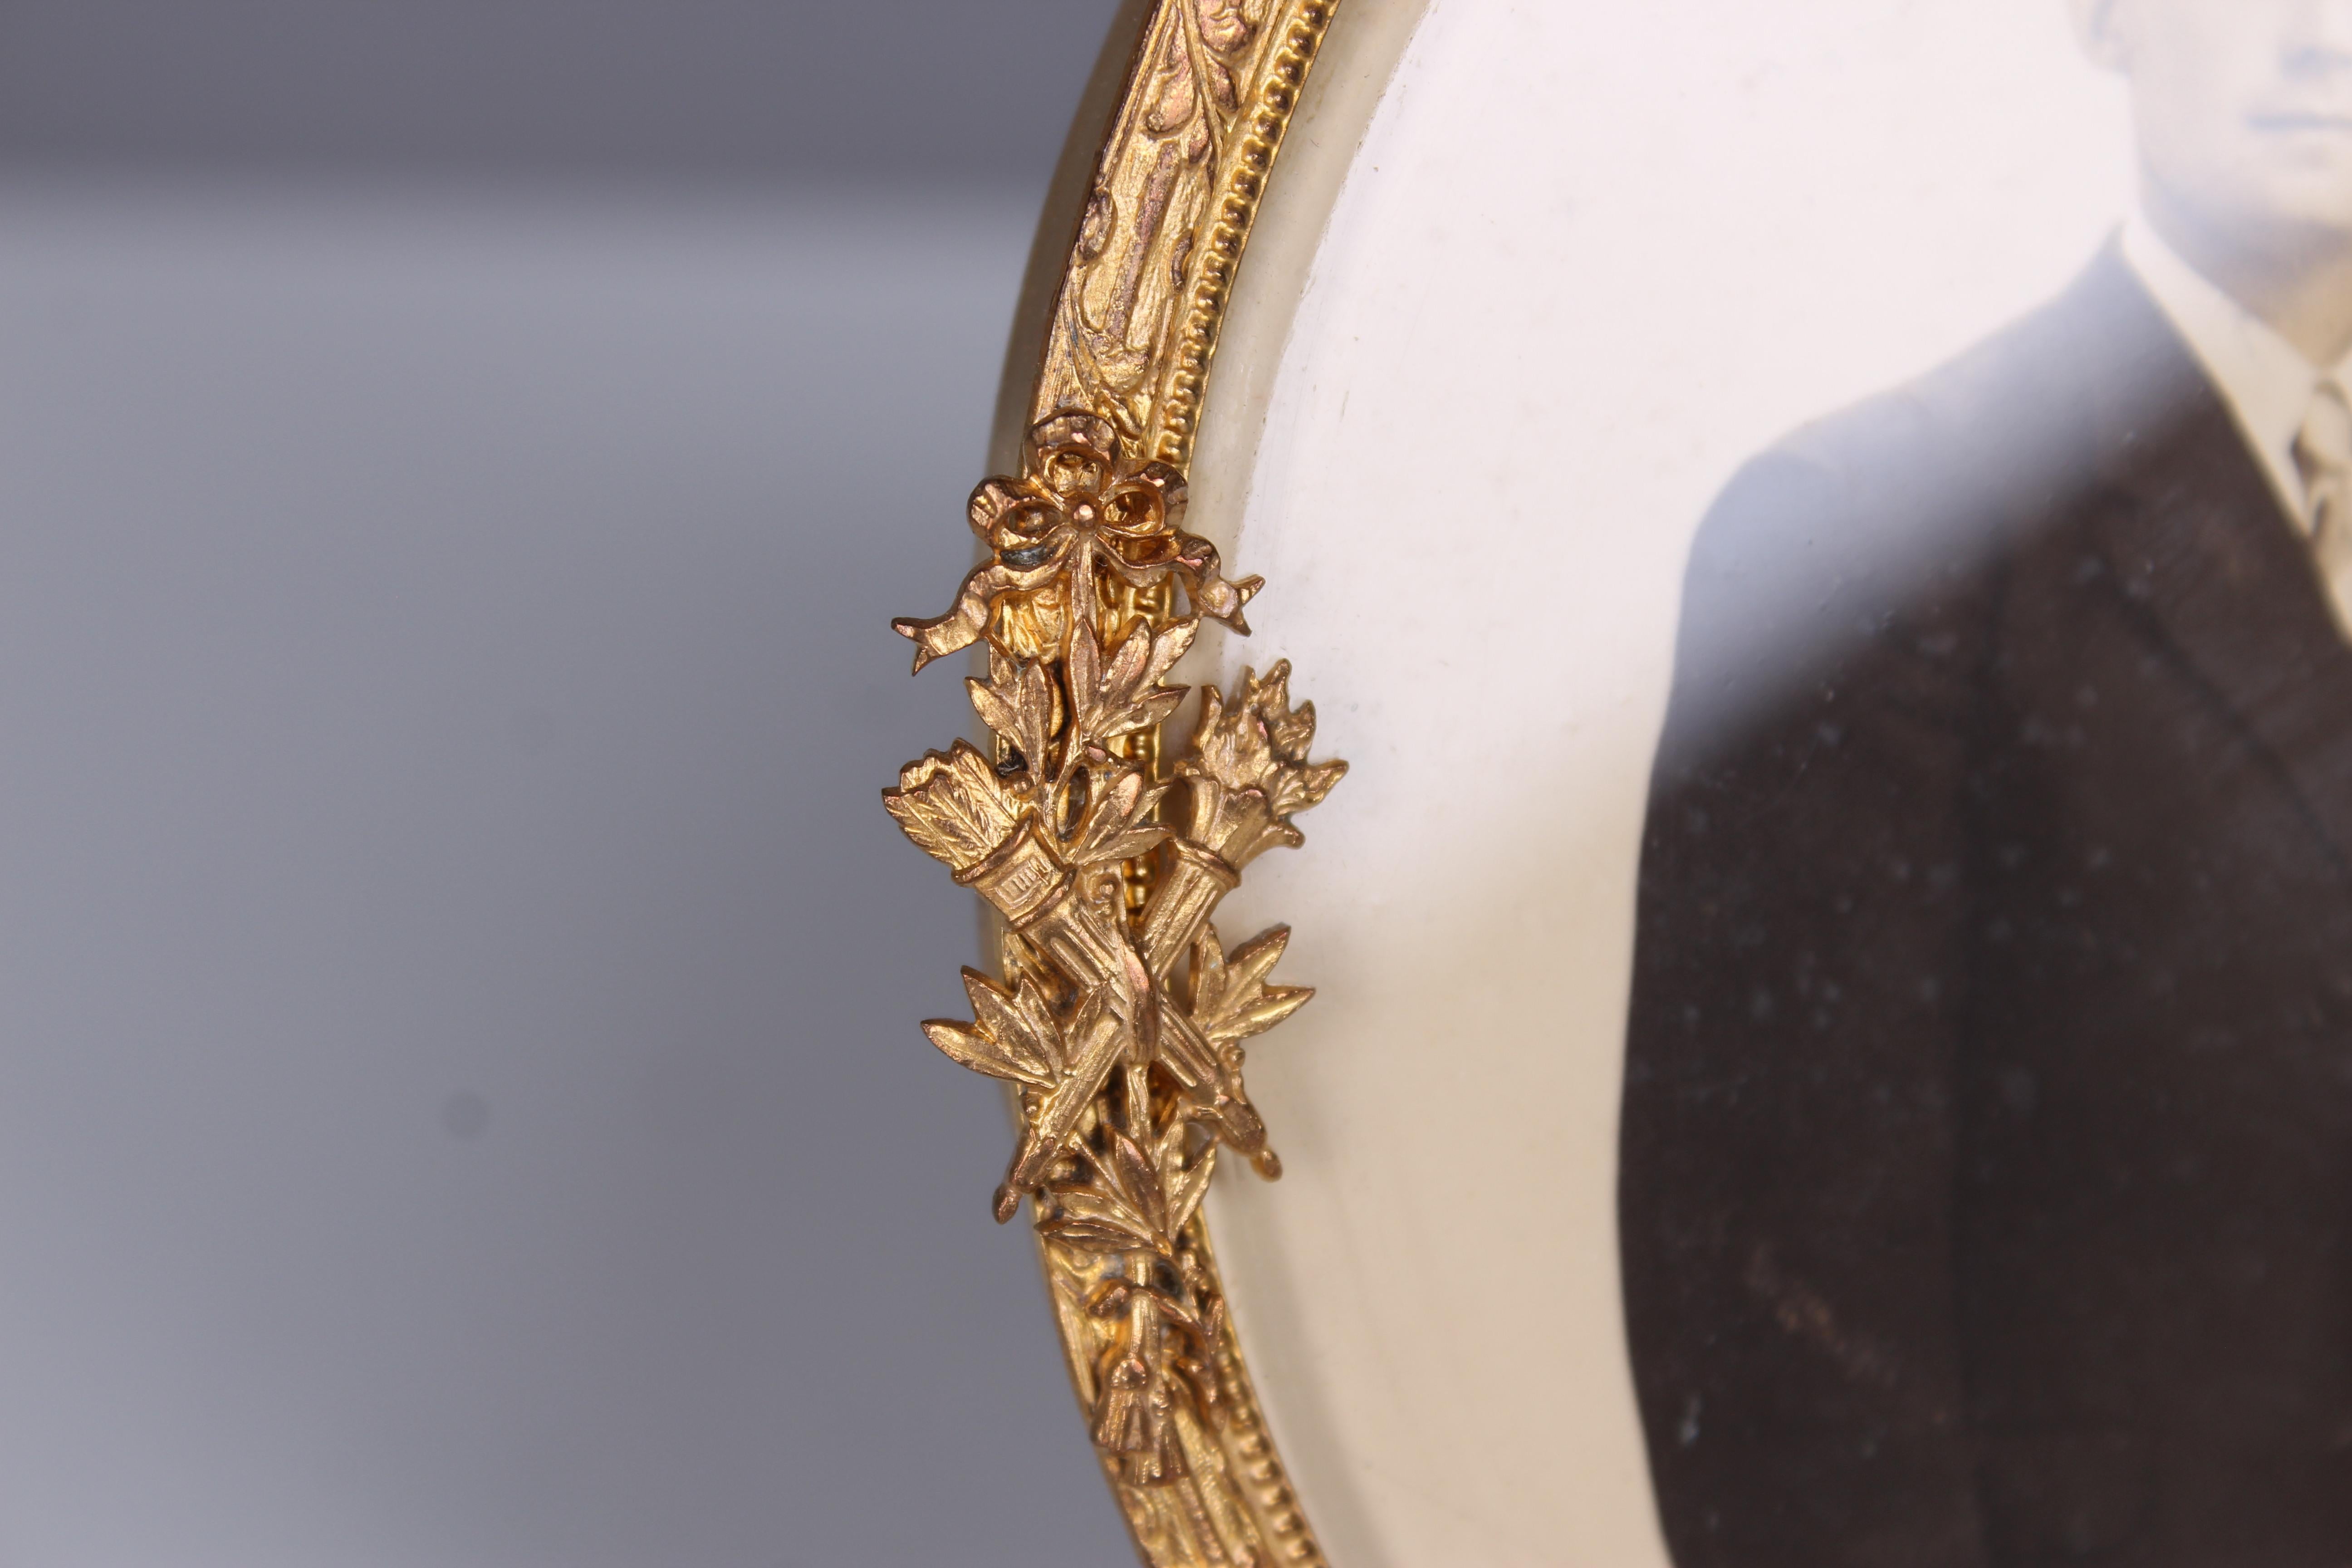 Beautiful round picture frame from France, circa 1890, with exceptional fine embellishments.

